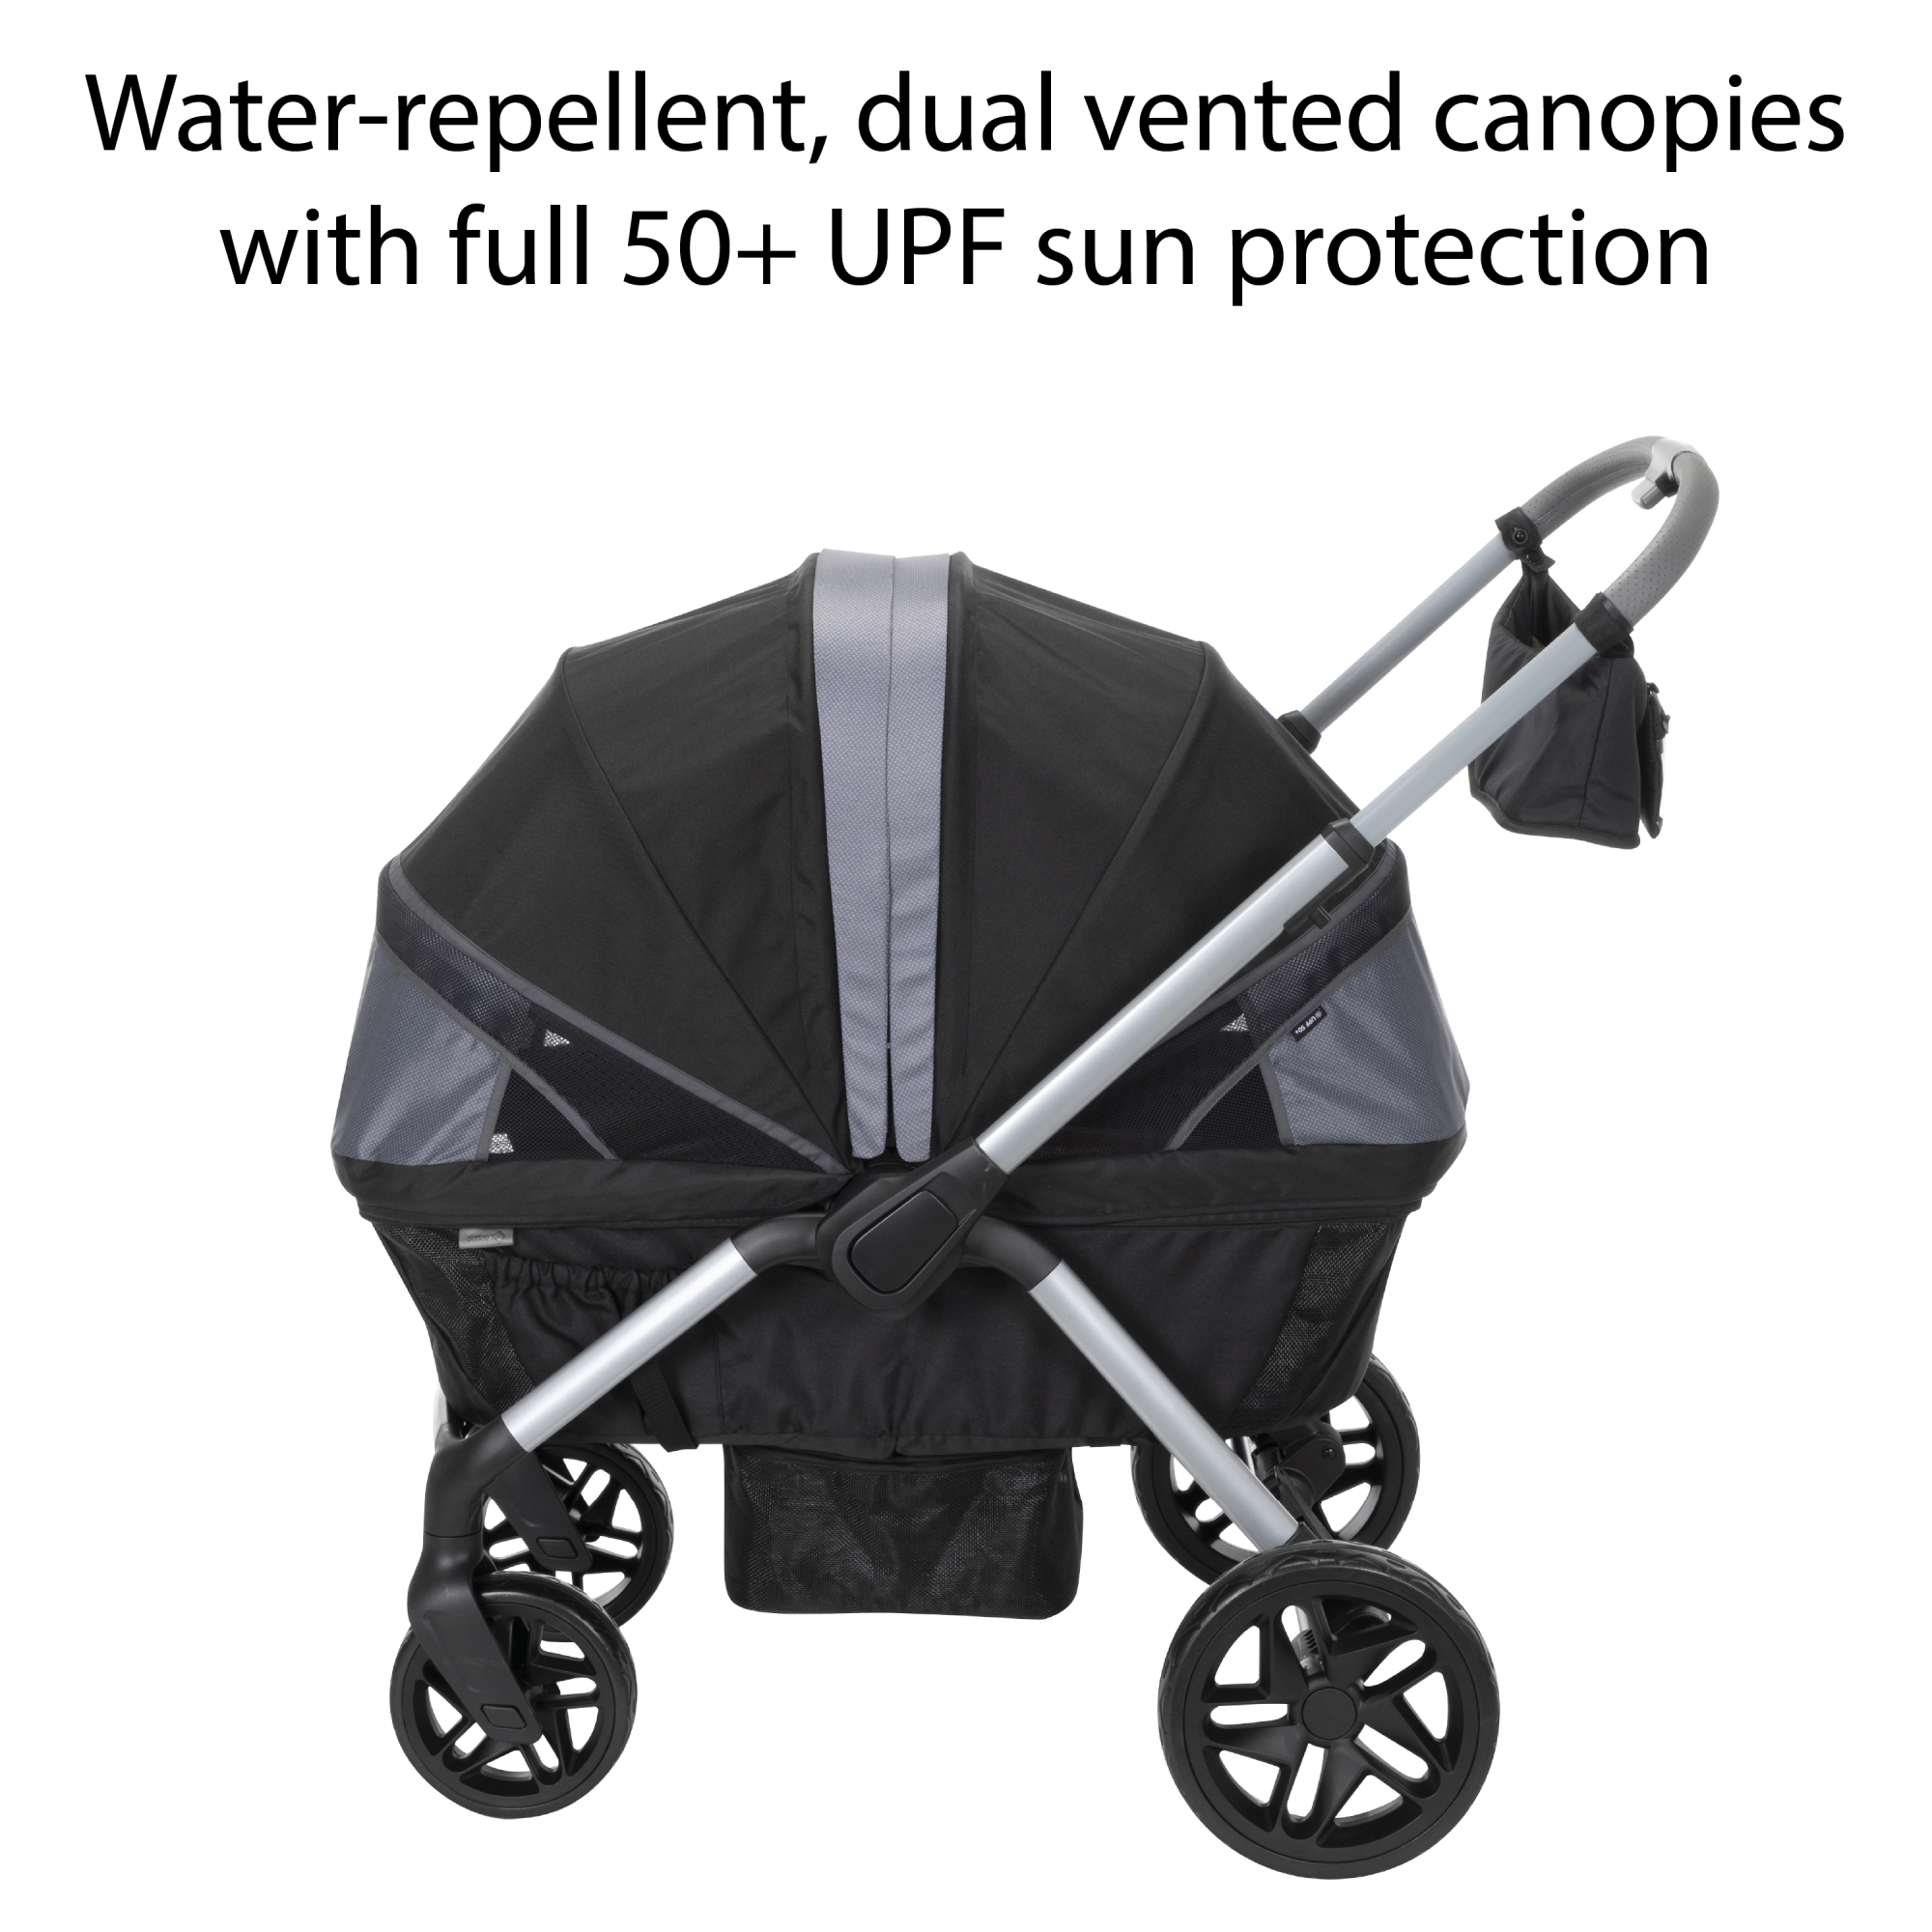 Summit Wagon Stroller - water-repellent, dual vented canopies with full 50+ UPF sun protection